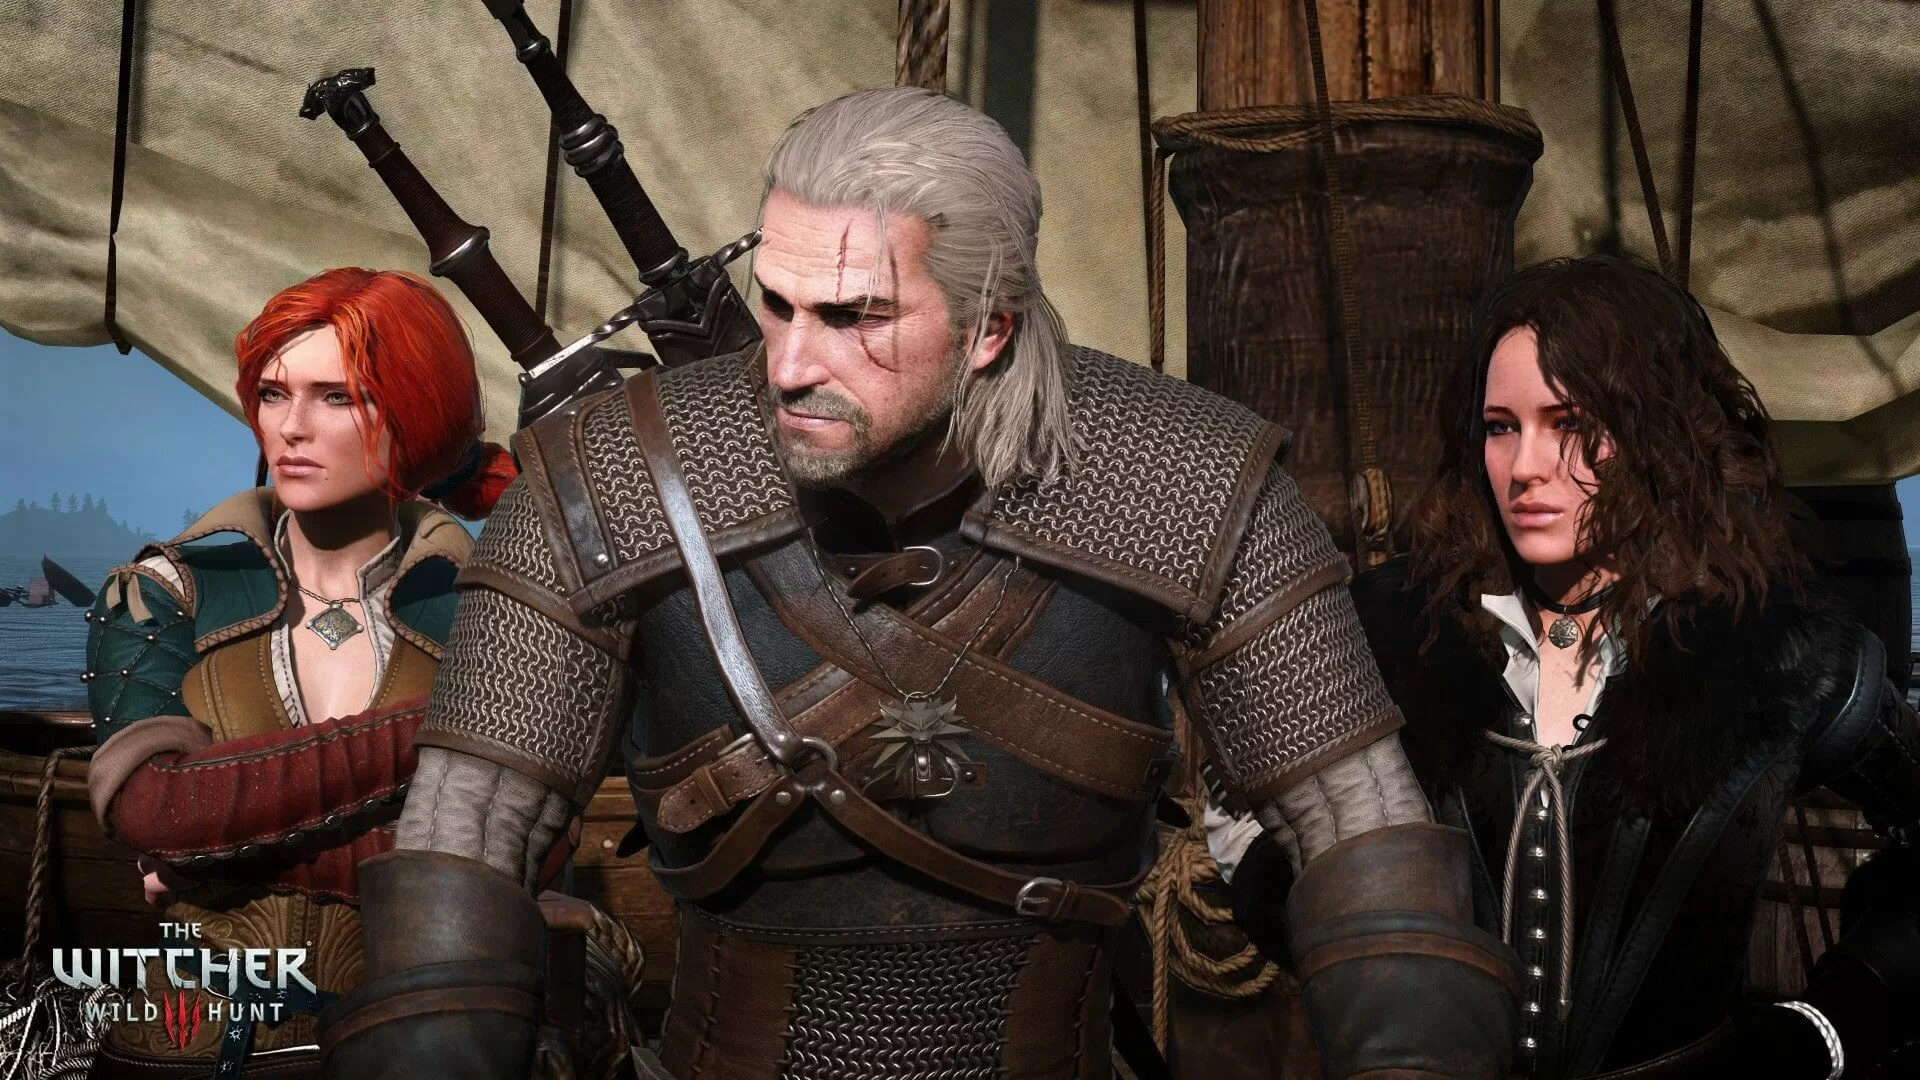 CD Projekt Red is giving away The Witcher 3 on GOG